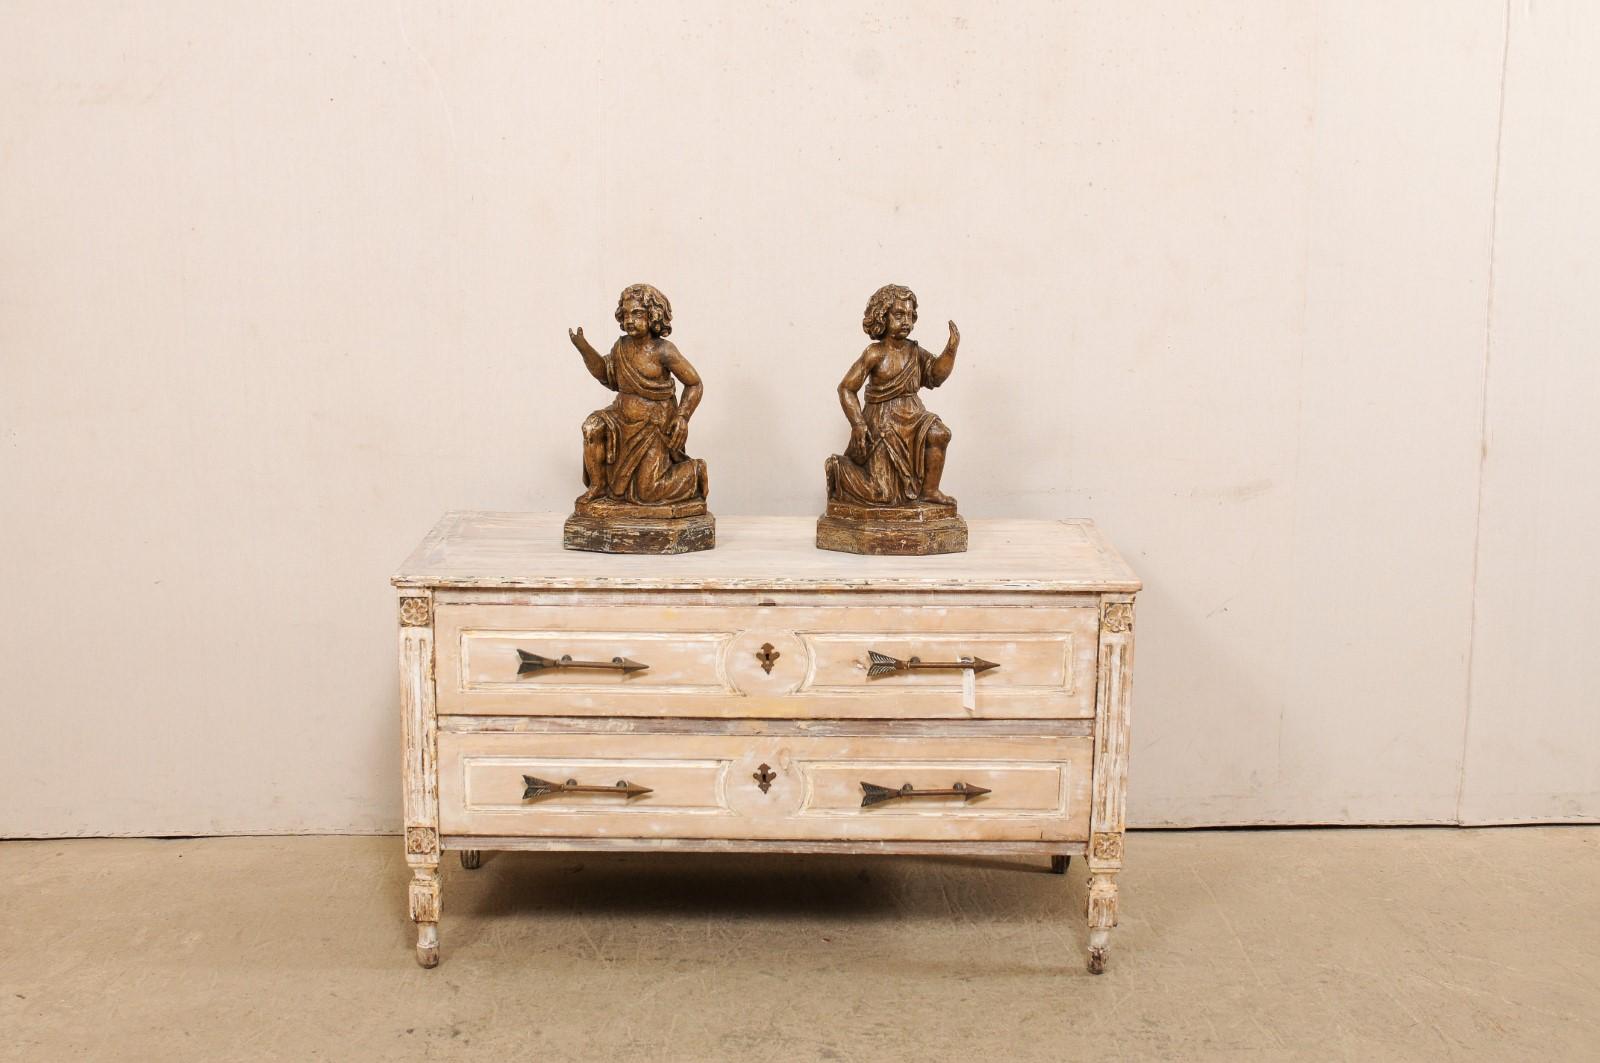 19th Century 19th C. French Hand-Carved Wood Cherub Figures, Beautiful Decorative Objects For Sale